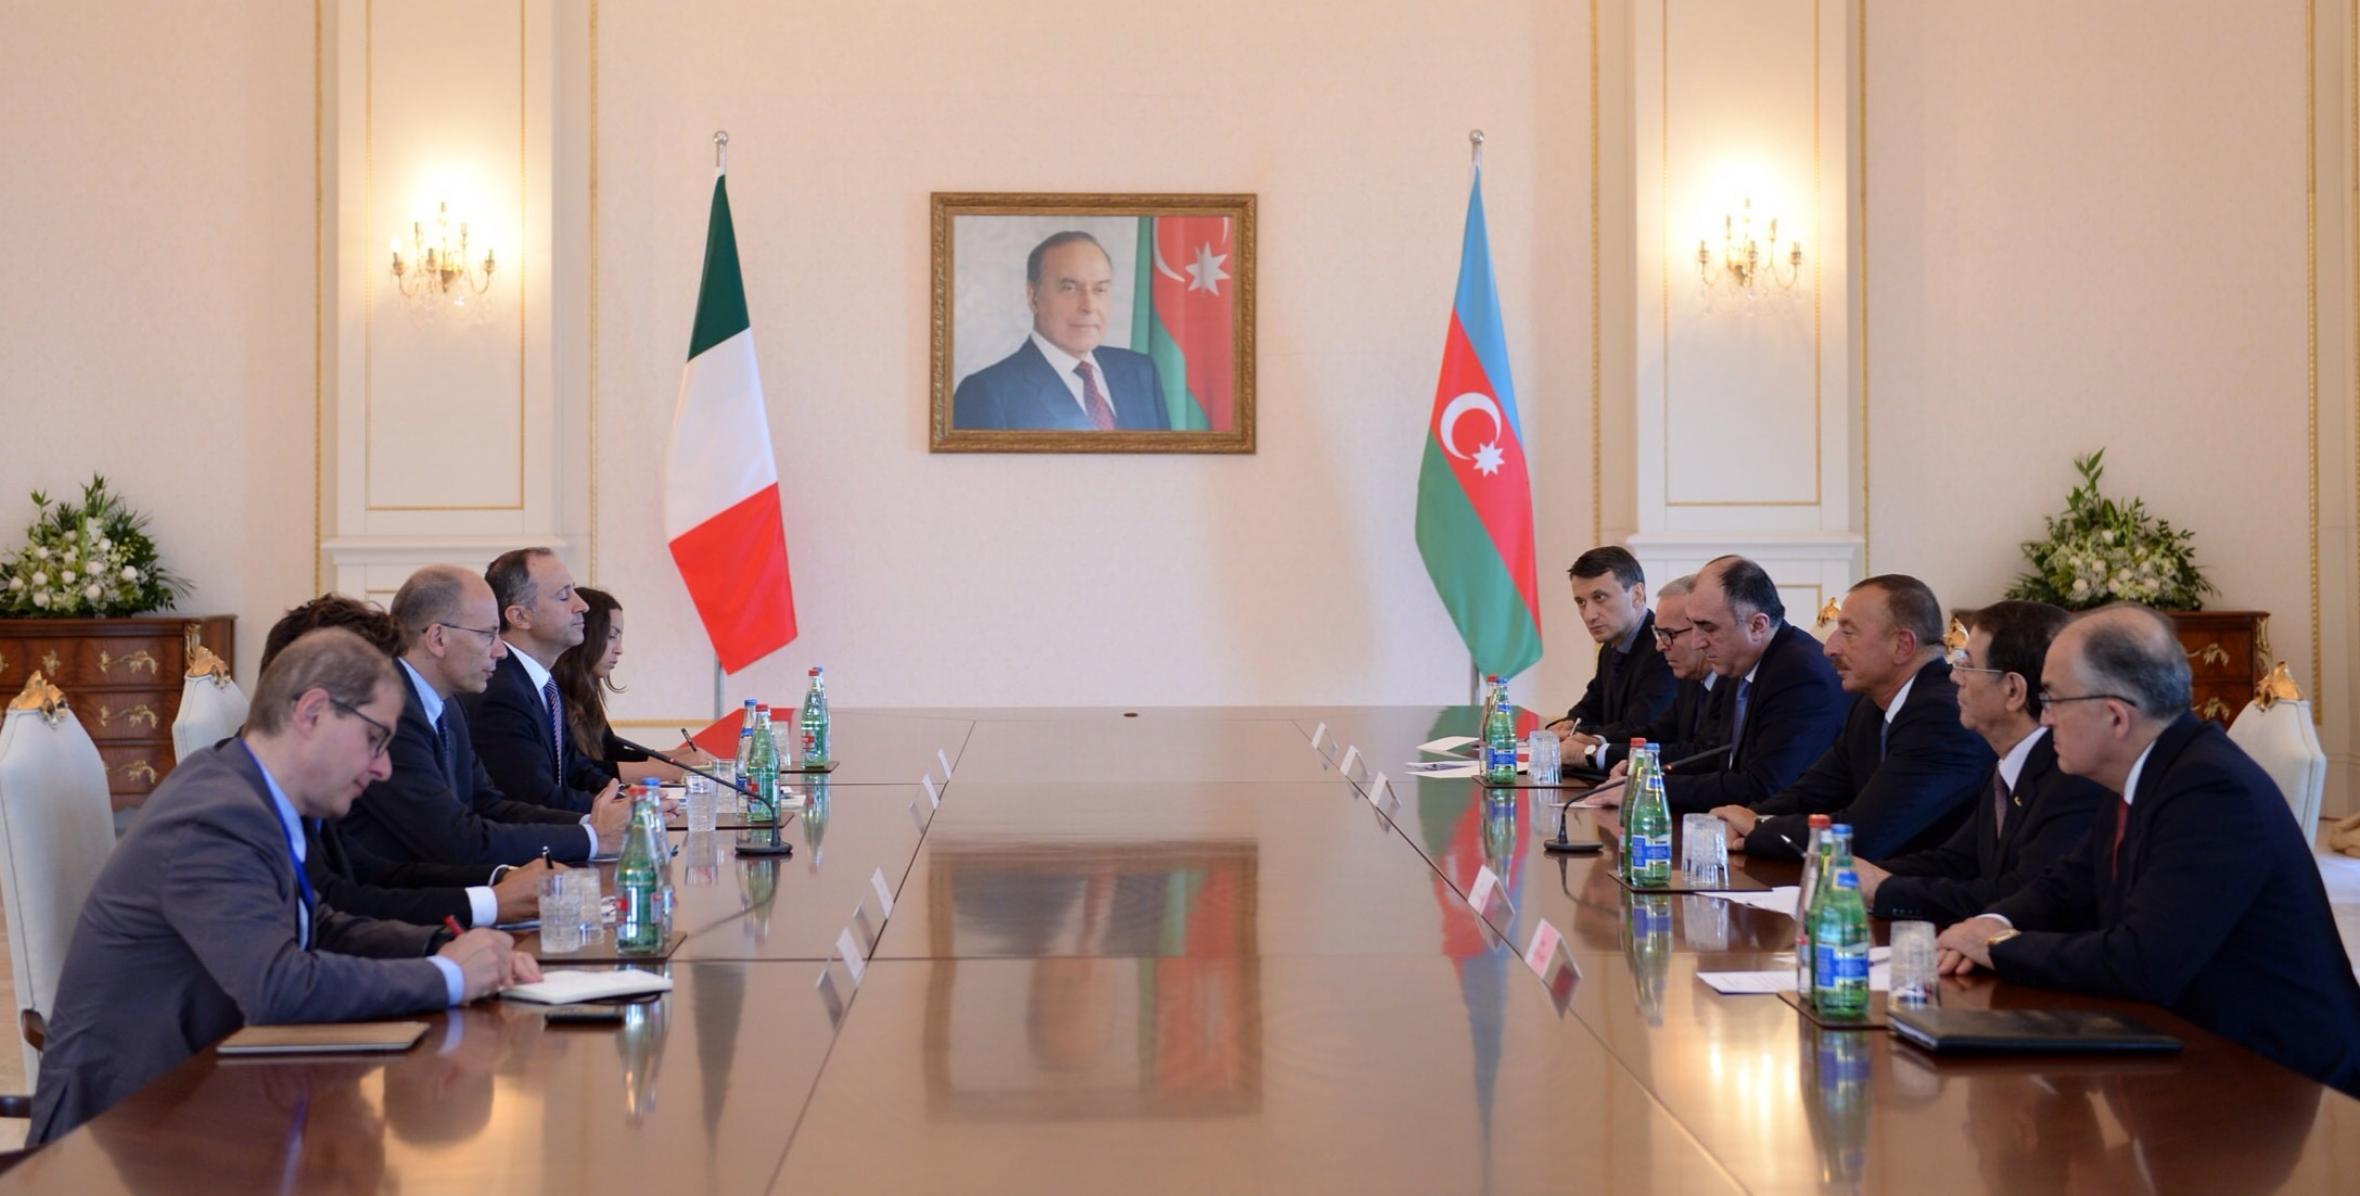 Ilham Aliyev and President of the Council of Ministers of Italy Enrico Letta held a meeting in an expanded format with the participation of delegations